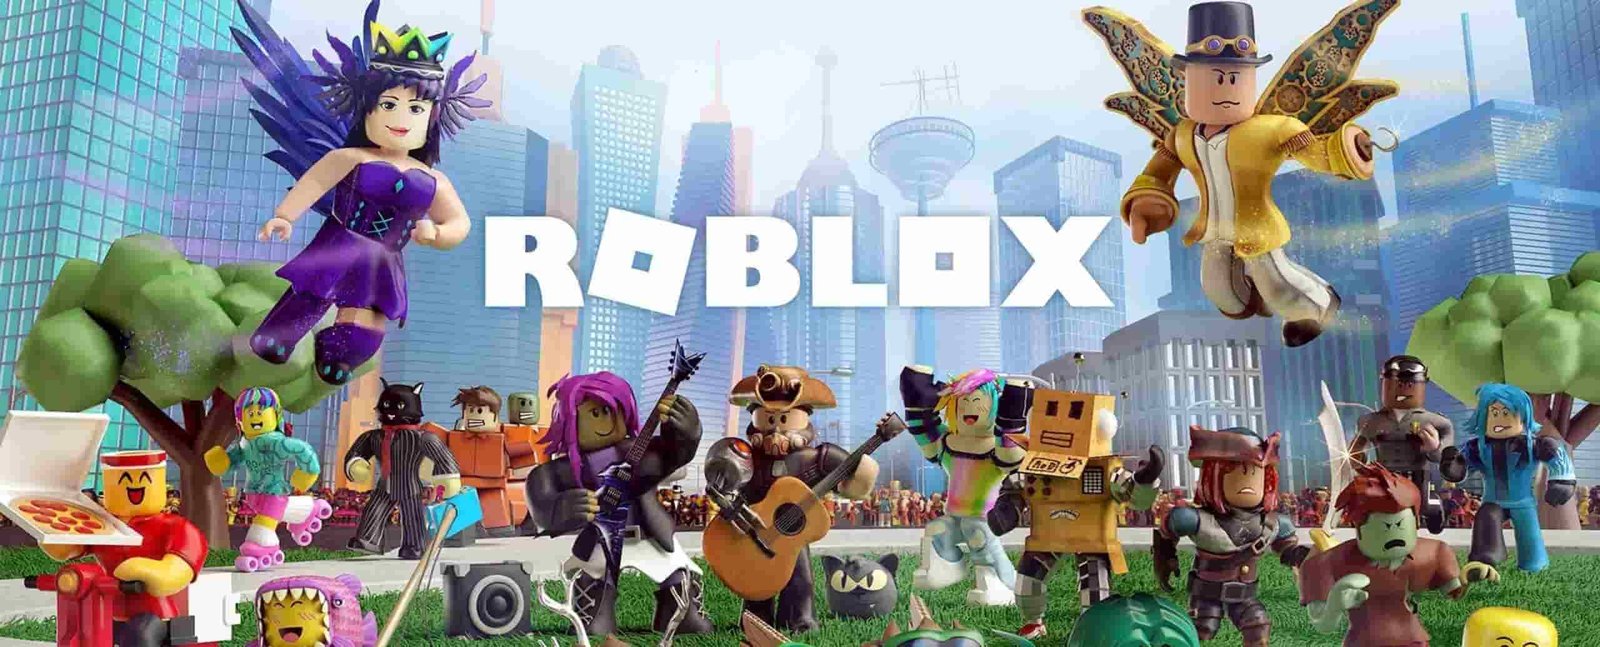 Roblox Voice Chat Feature Might Only Work For 18 Users Suggests Code Digistatement - roblox add voice chat